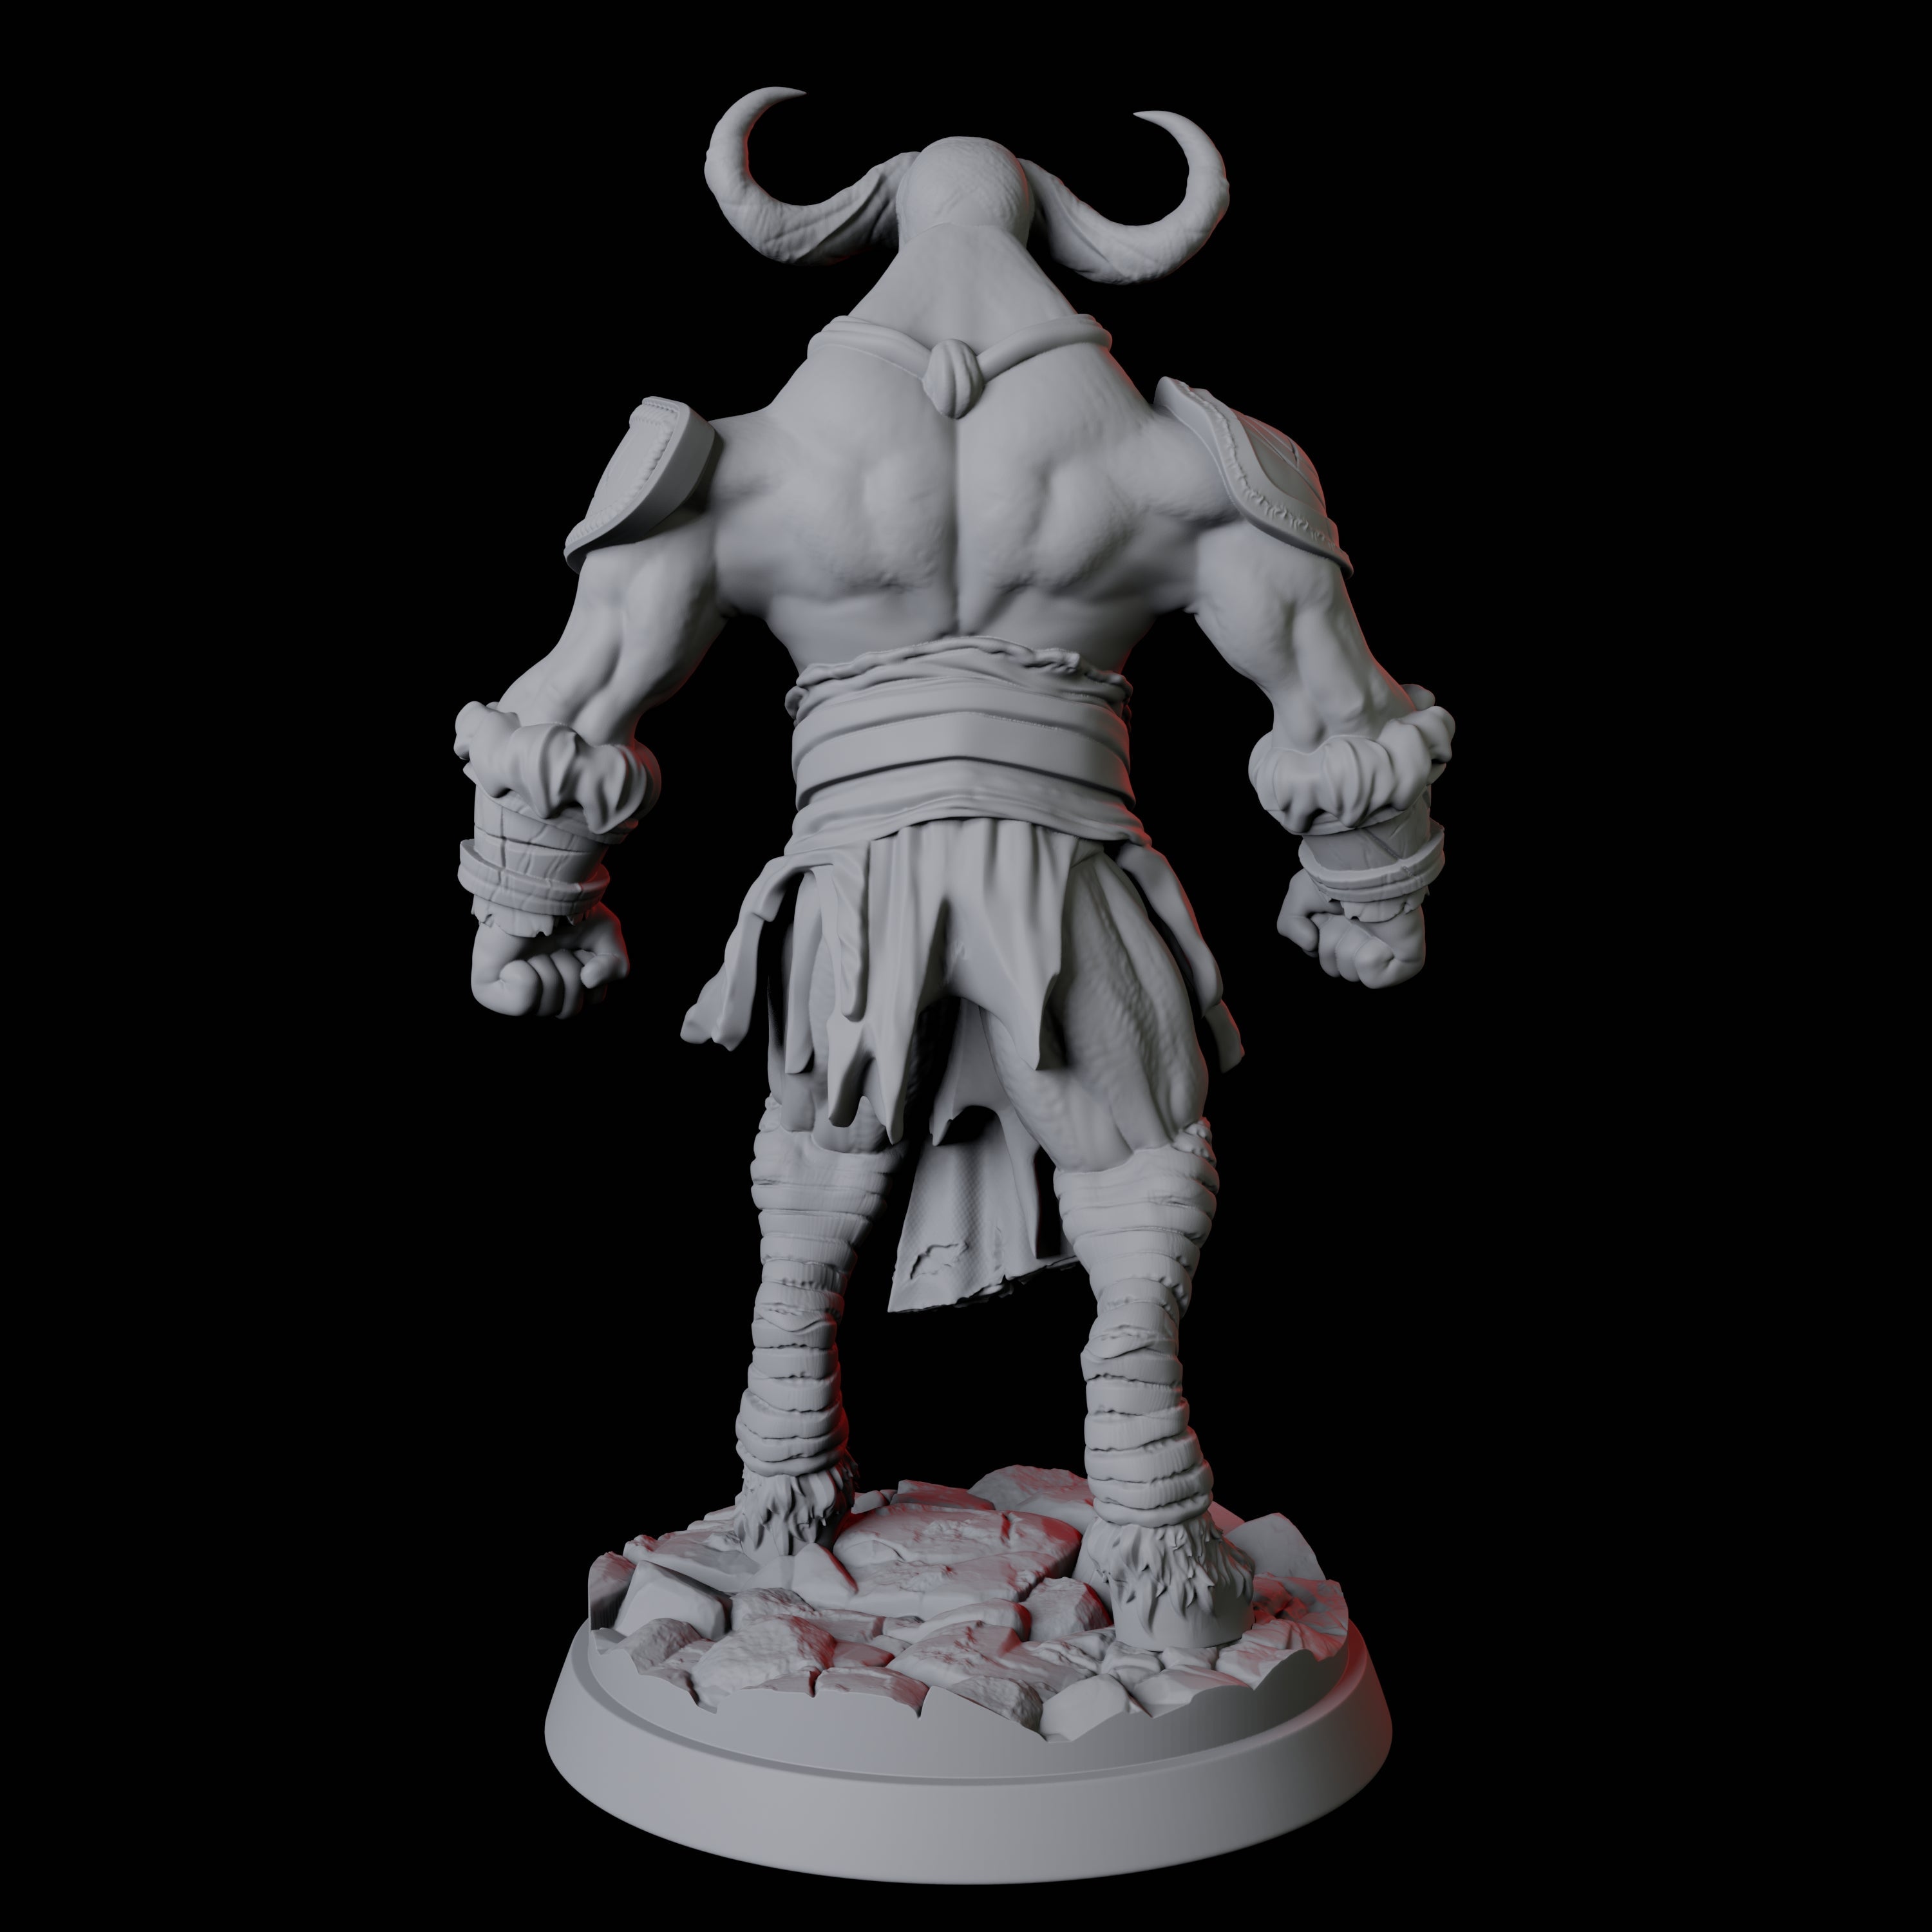 Gym Bro Yakfolk Miniature for Dungeons and Dragons, Pathfinder or other TTRPGs